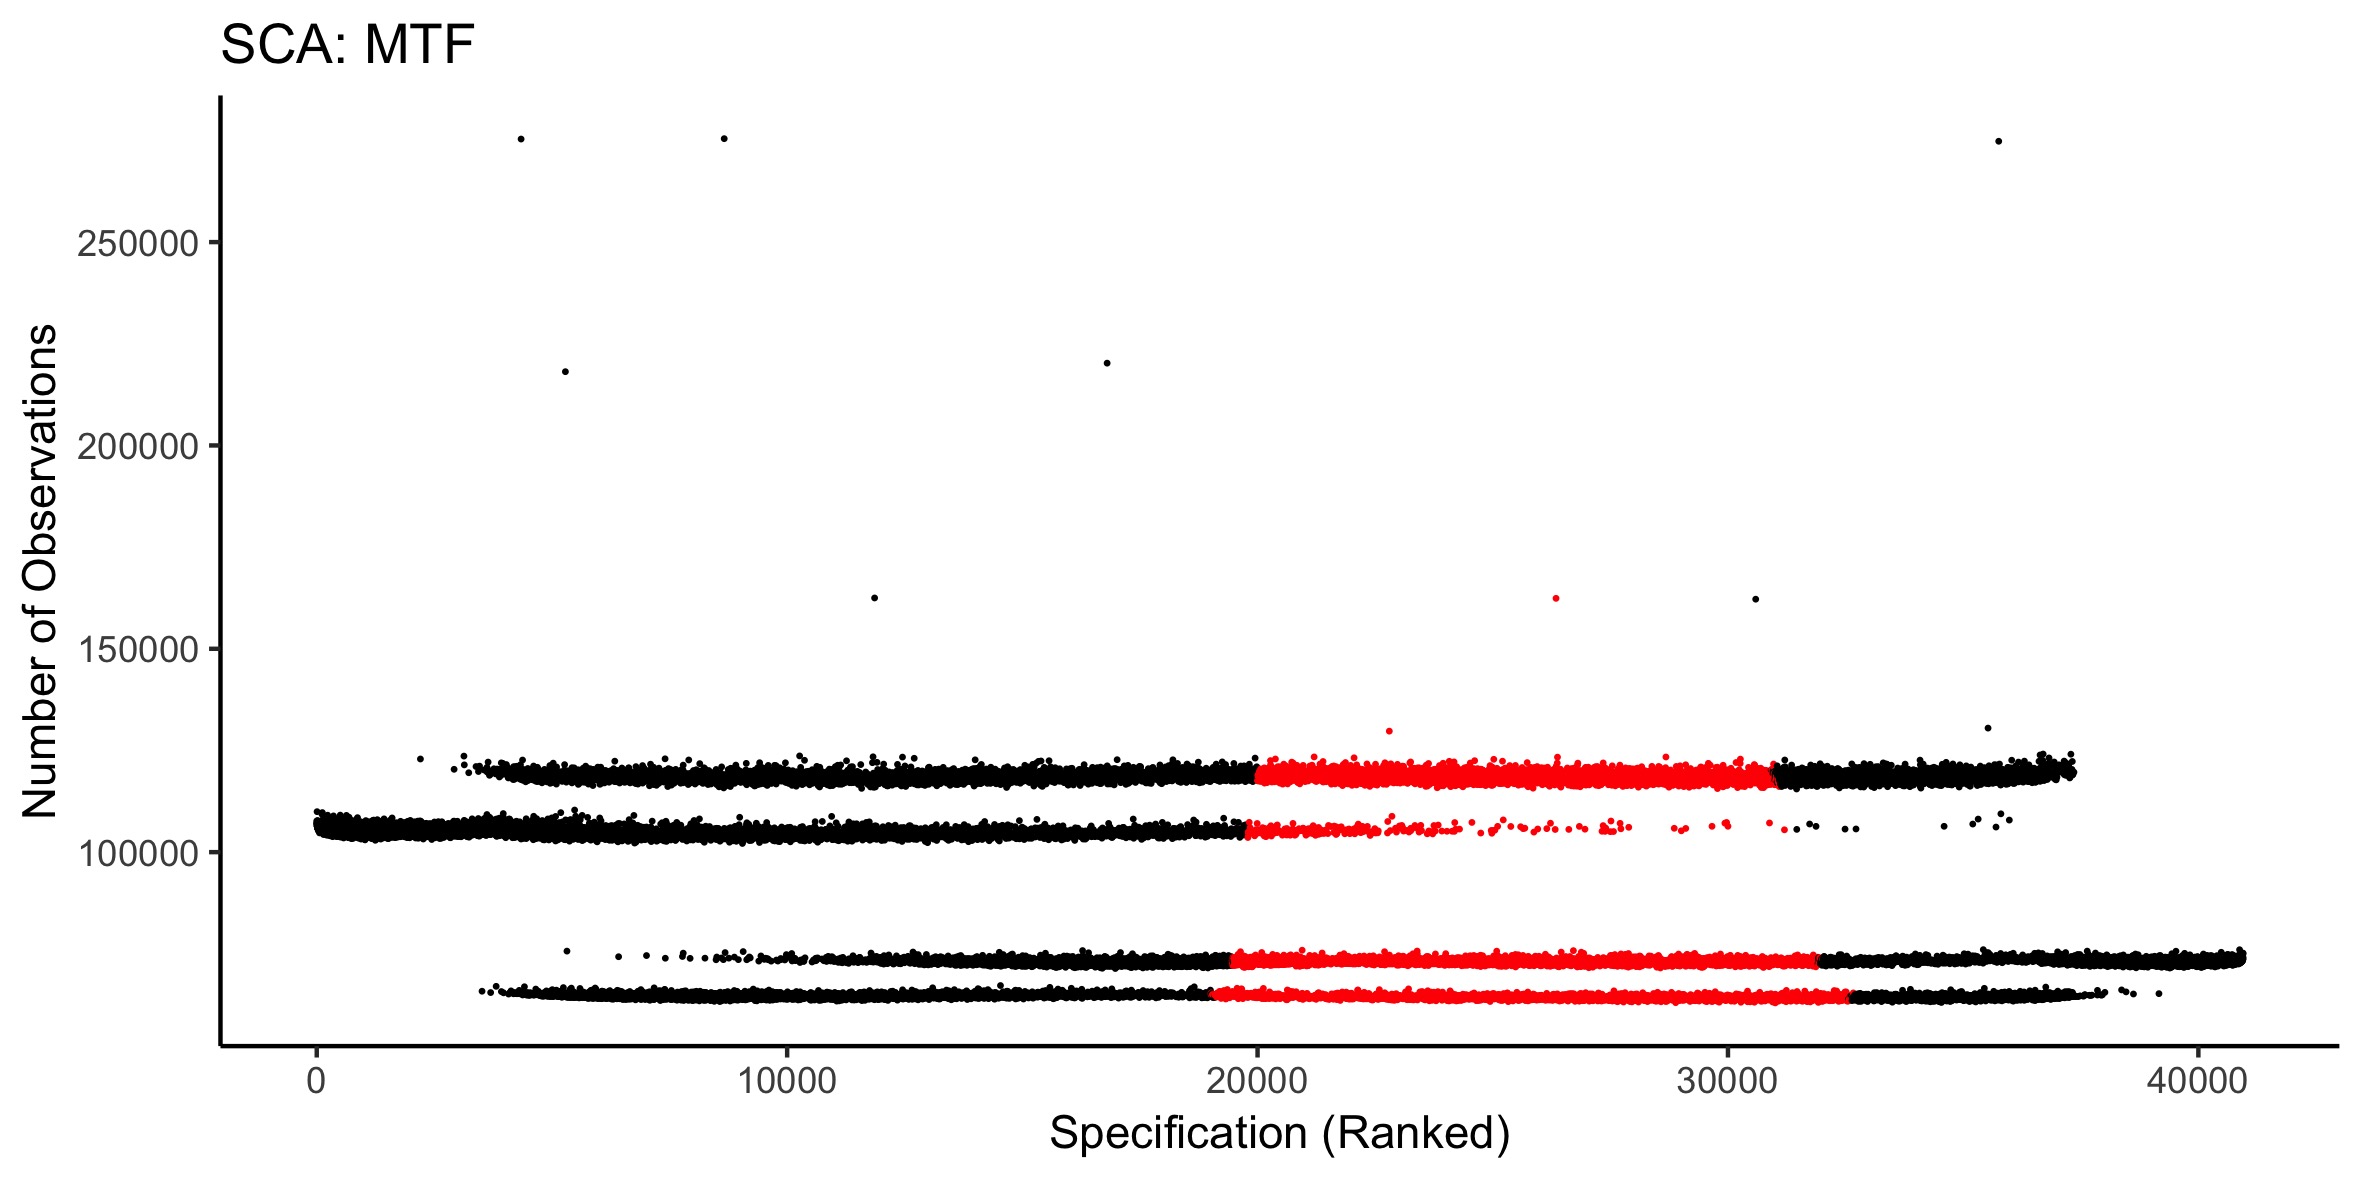 Number of observations (participants) for each specification analysed in the MTF SCA. Red dots indicate when the specification was non-significant, while black dots show significant specifications.